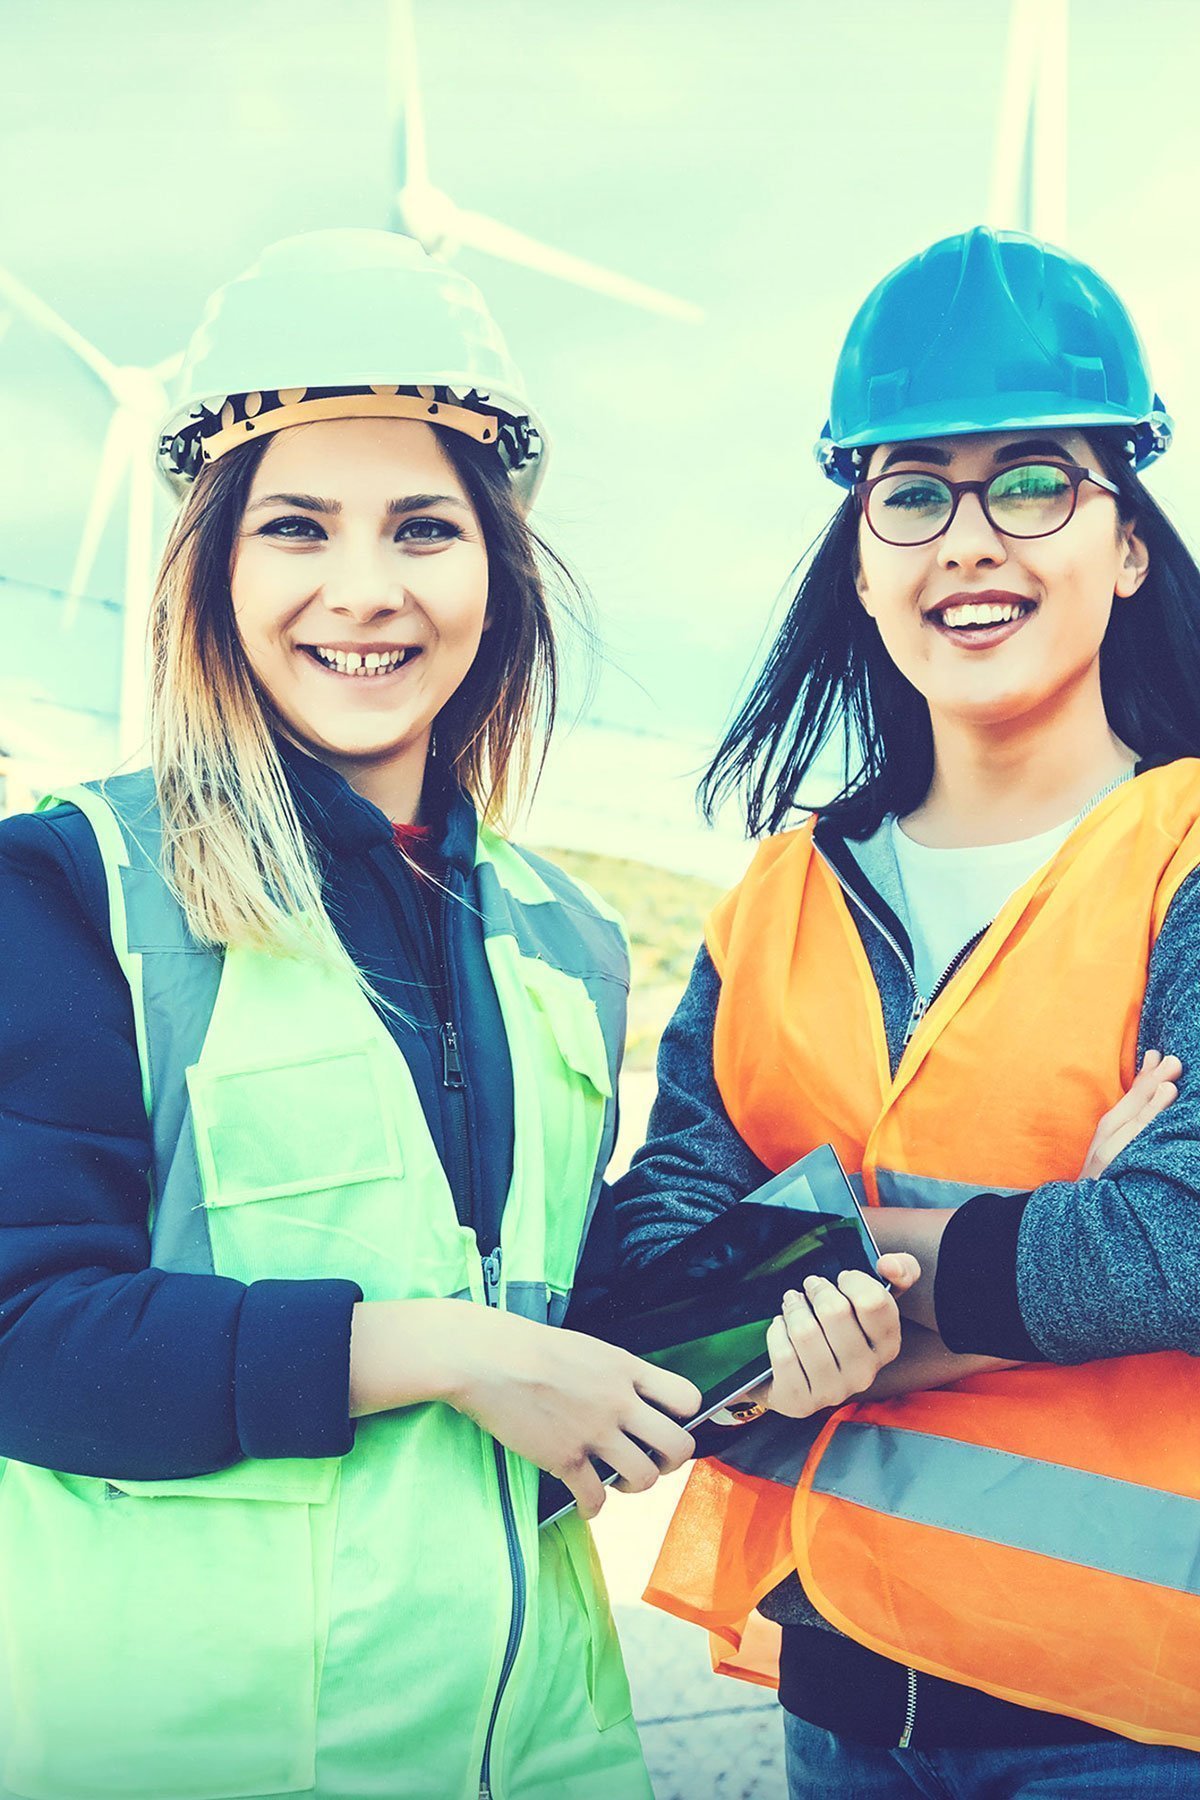 Image of a two women apprentices on a construction site